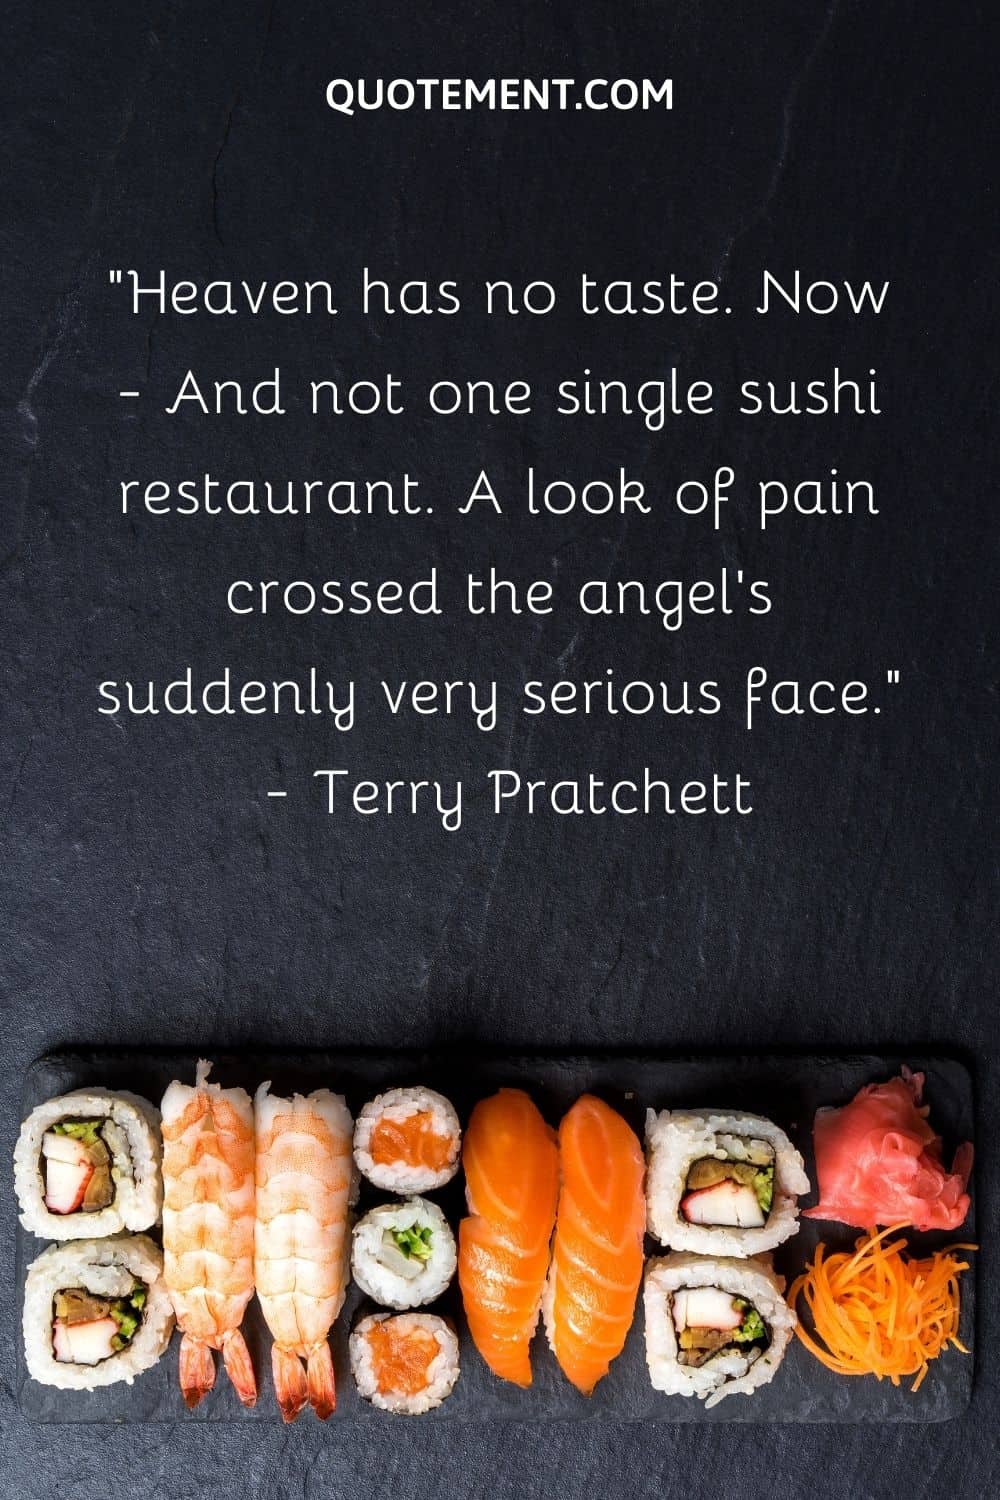 Heaven has no taste and not one sushi restaurant